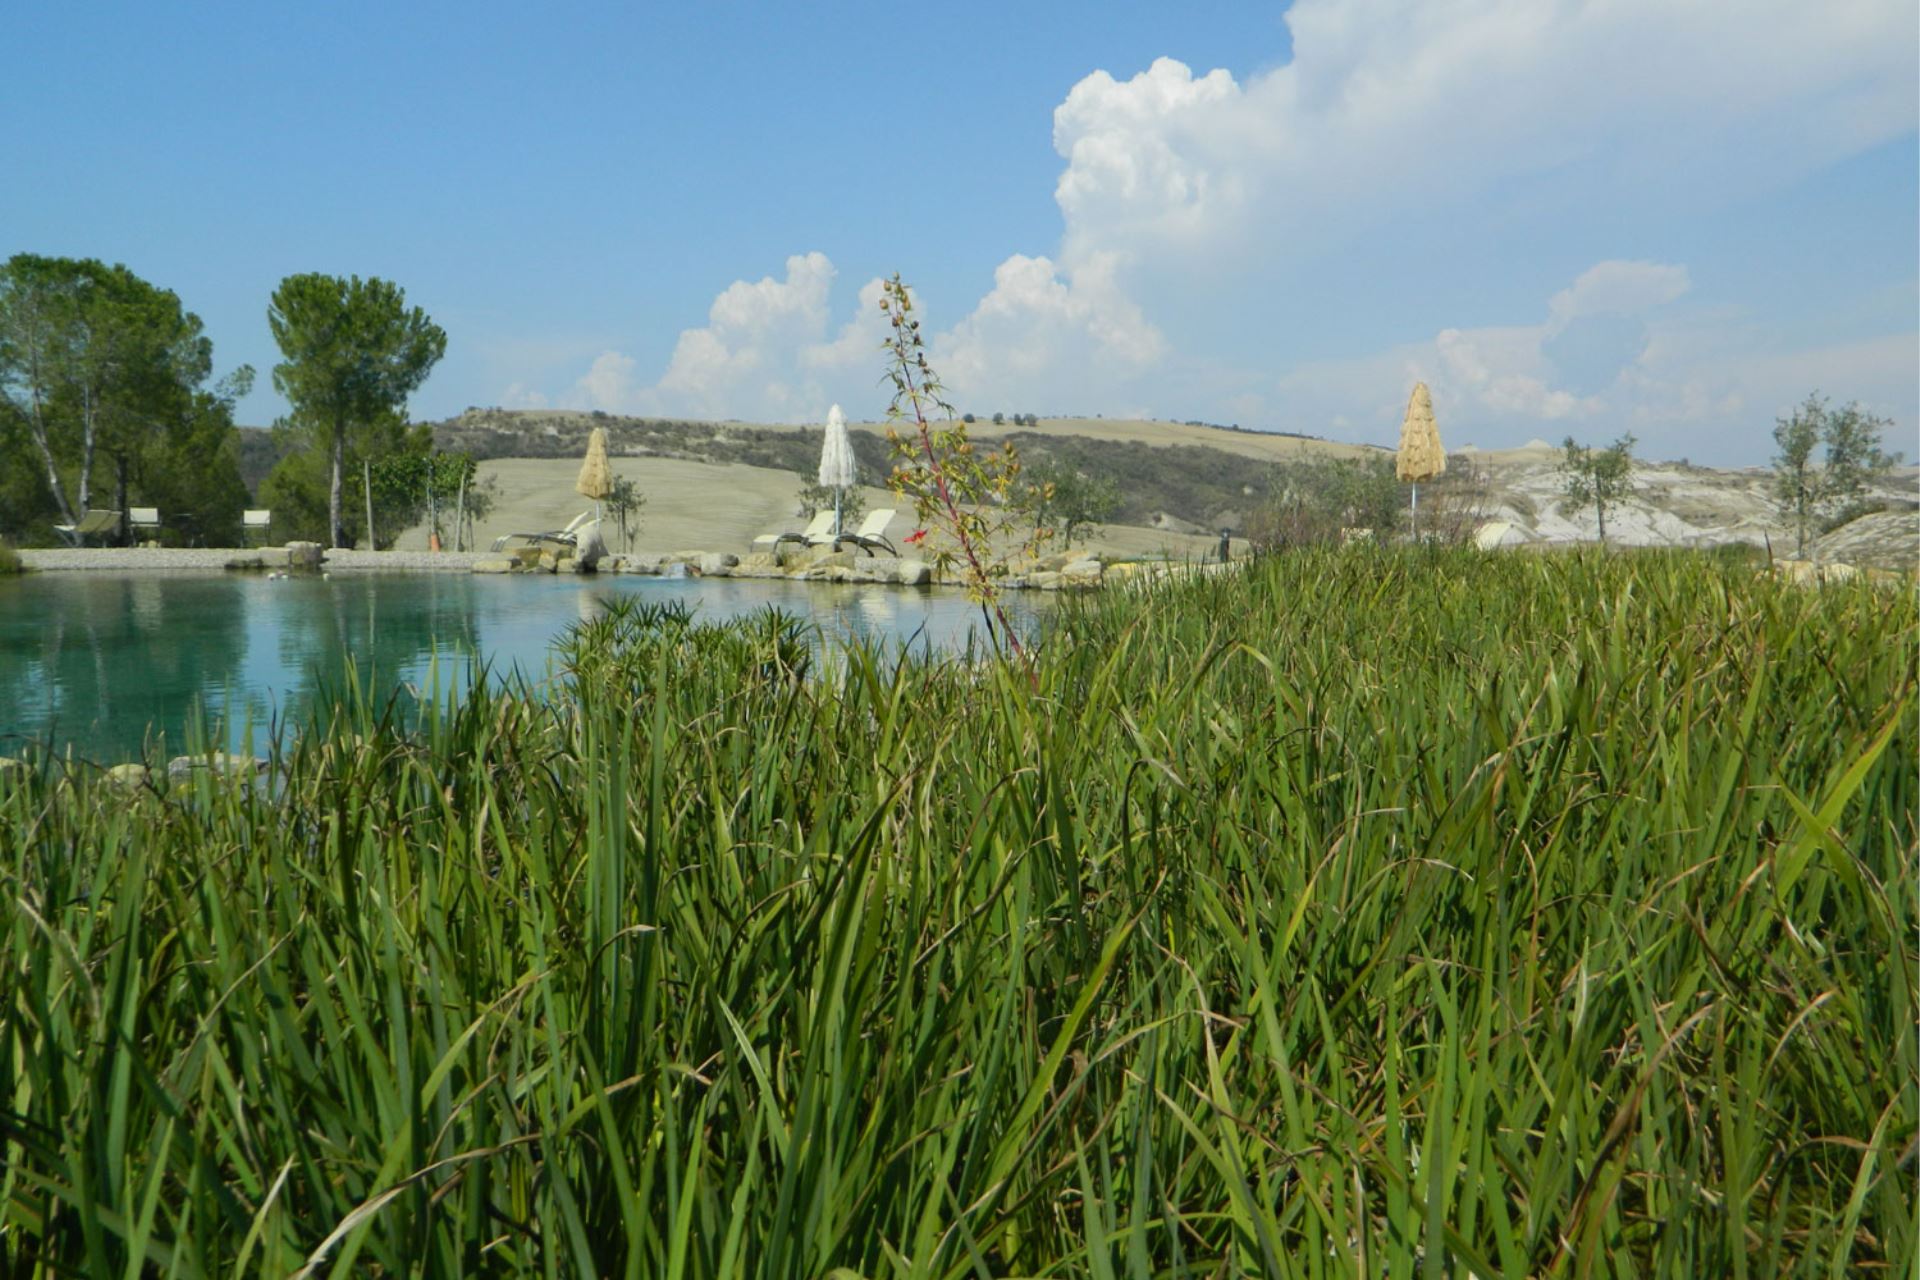 APARTMENTS WITH POOL IL LAGHETTO SAN QUIRICO D'ORCIA TOSCANA